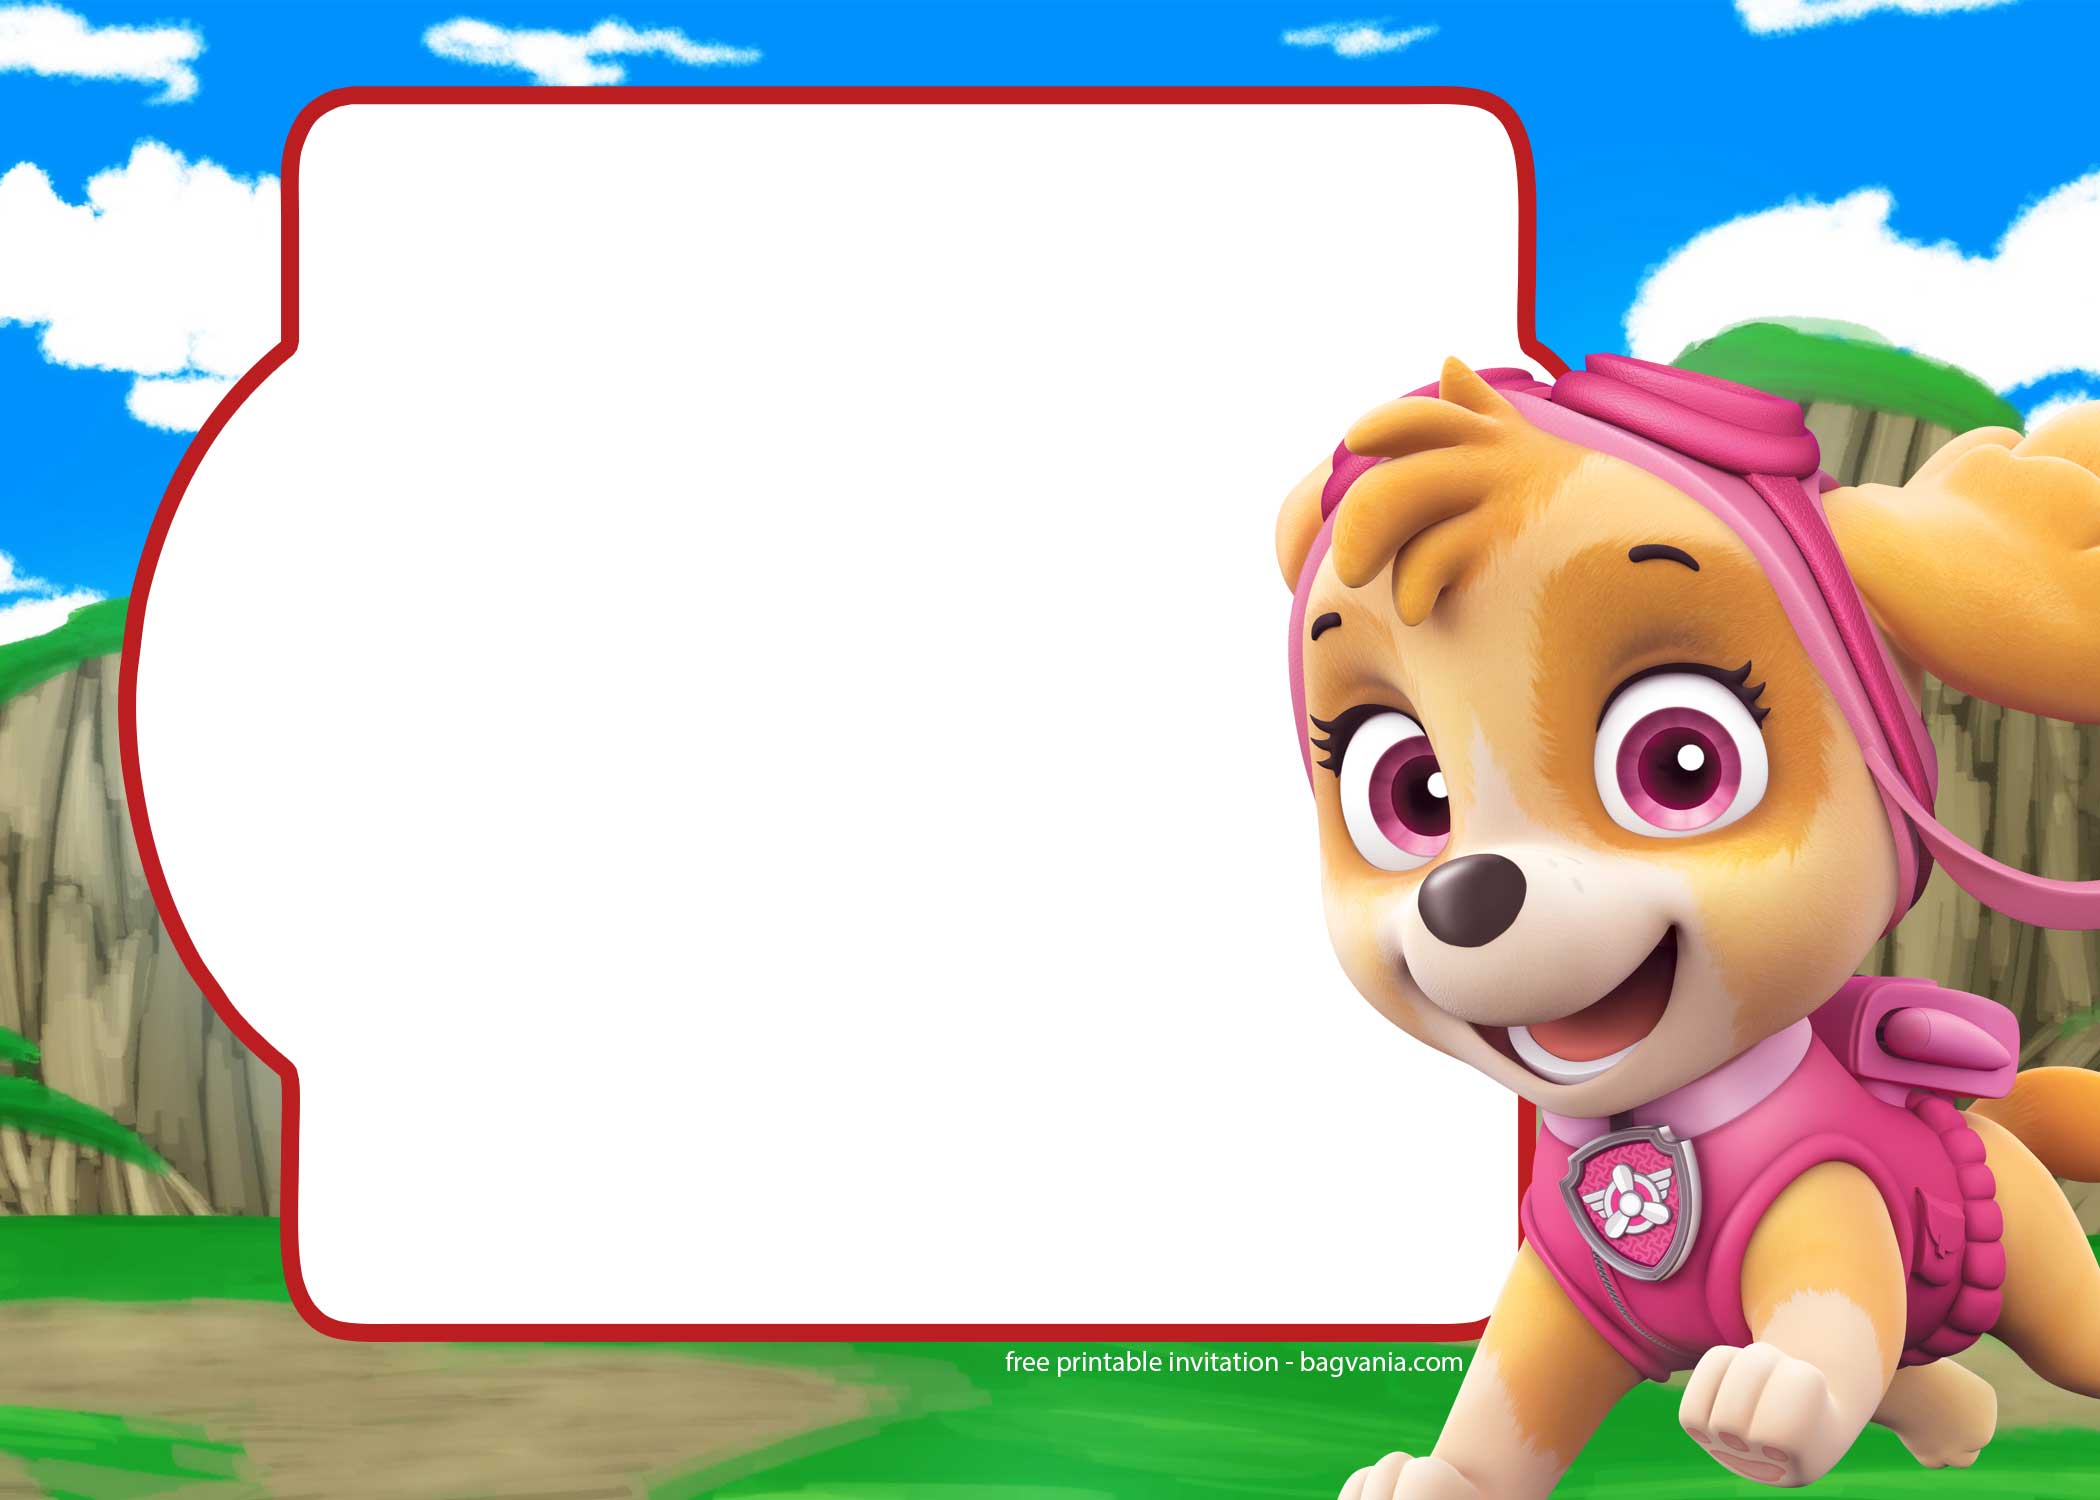 free-printable-paw-patrol-invitation-templates-lookout-version-download-hundreds-free